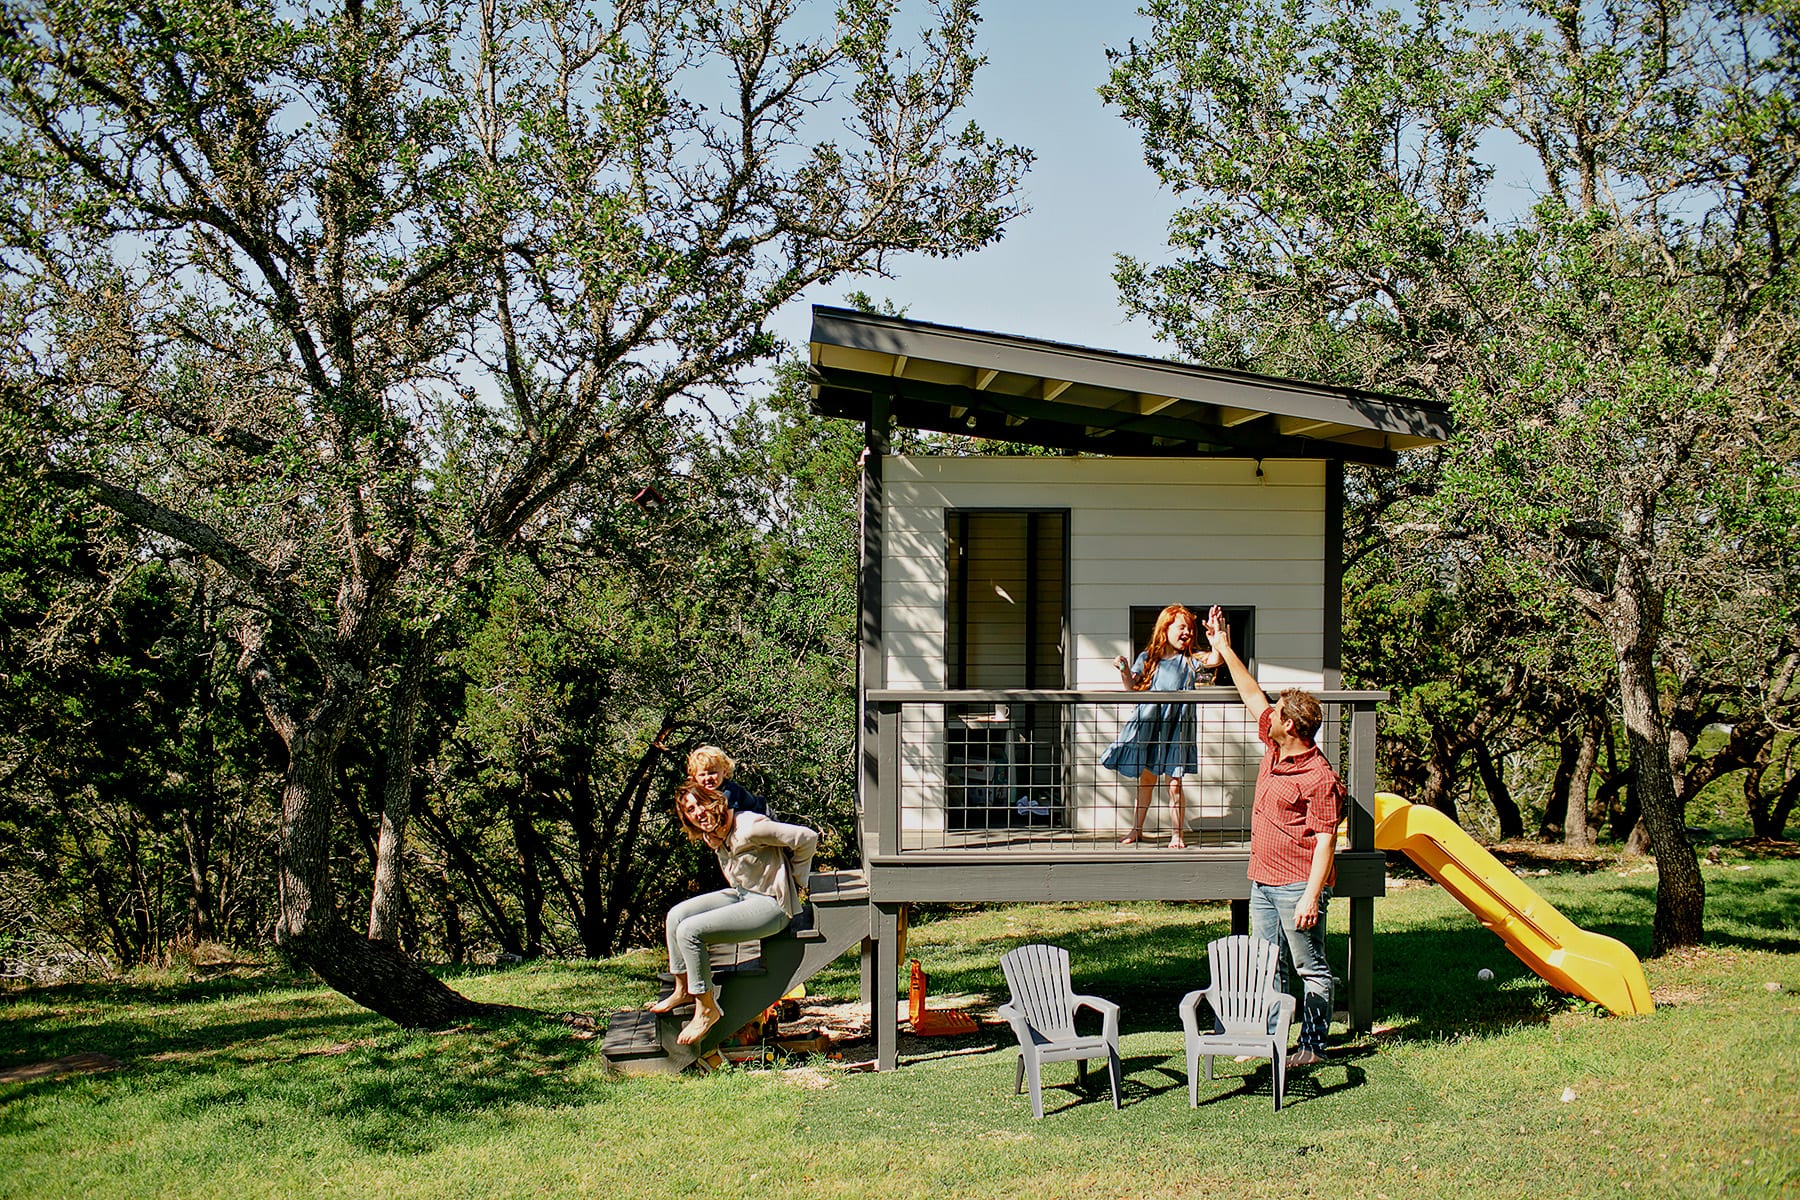 JR and Julie Nutt family in Dripping Springs, Texas